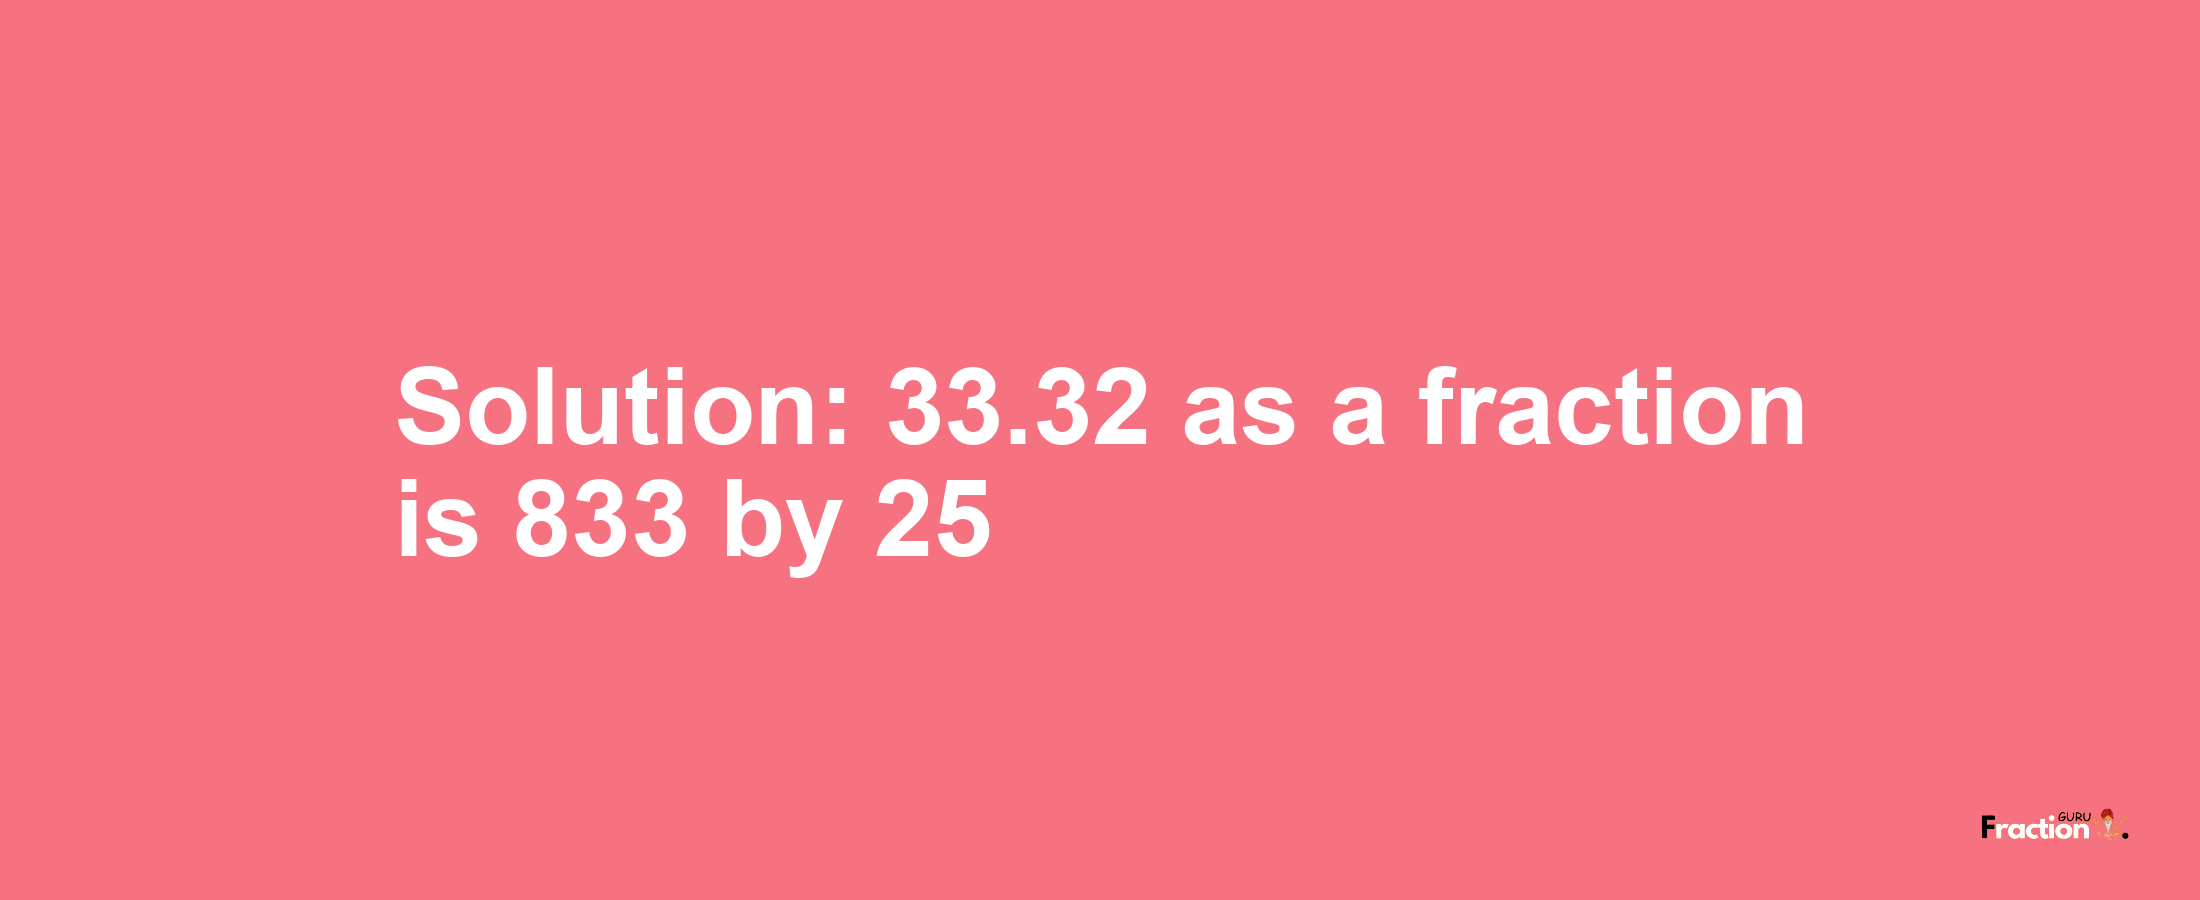 Solution:33.32 as a fraction is 833/25